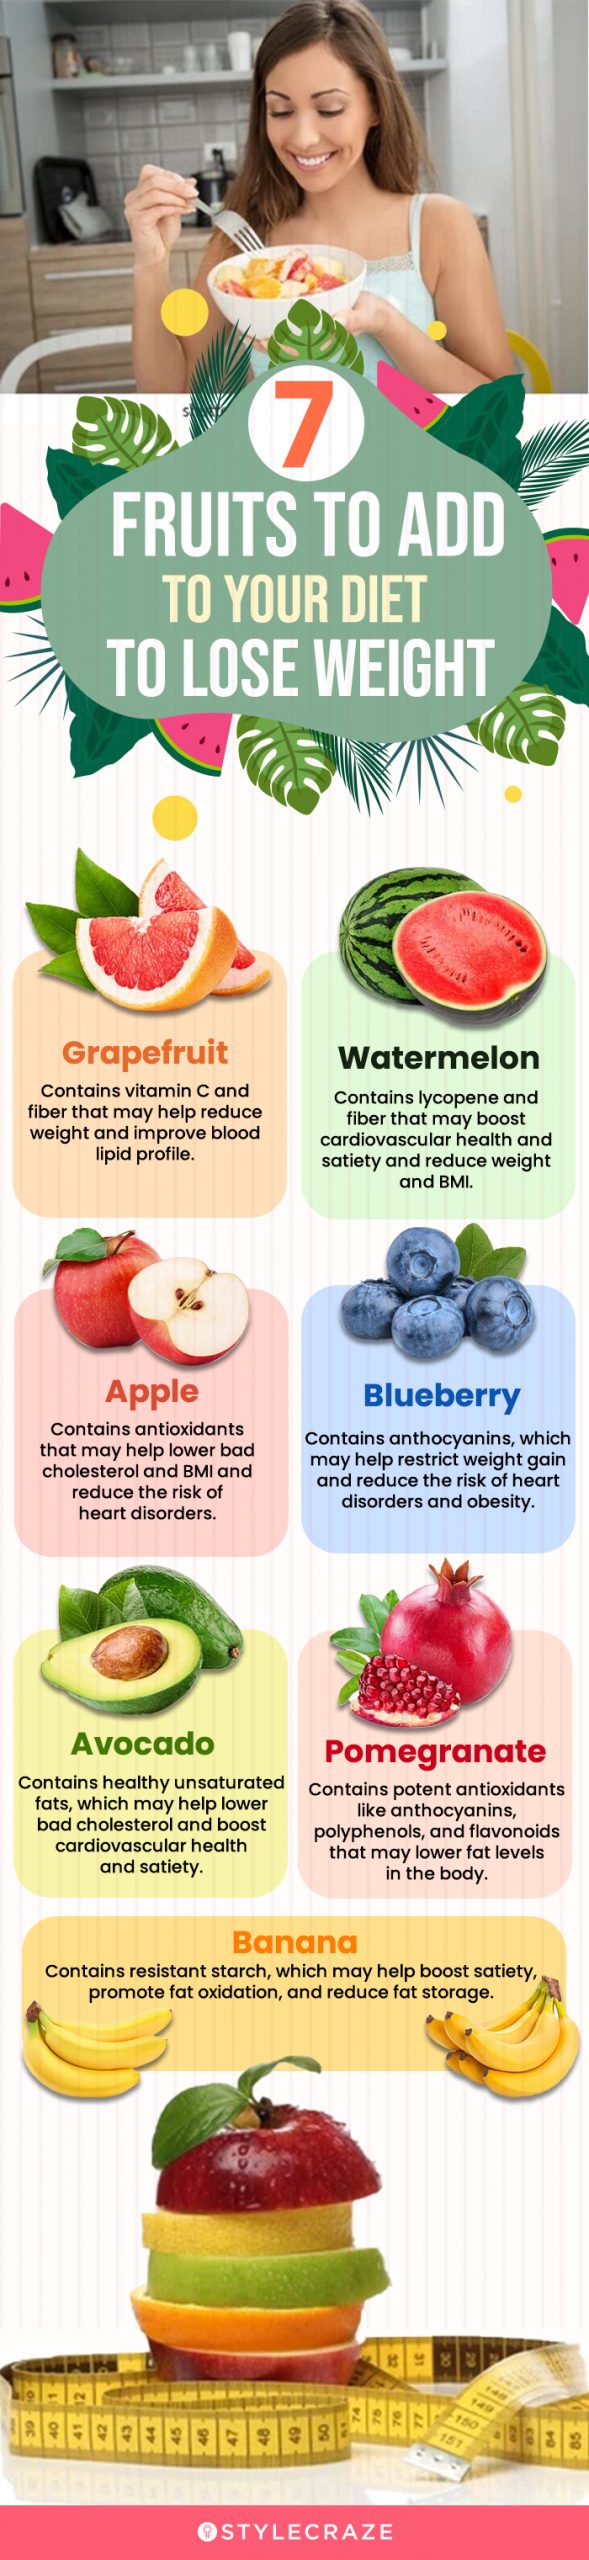 Benefits Of Fruits - Add Fruits into your diet